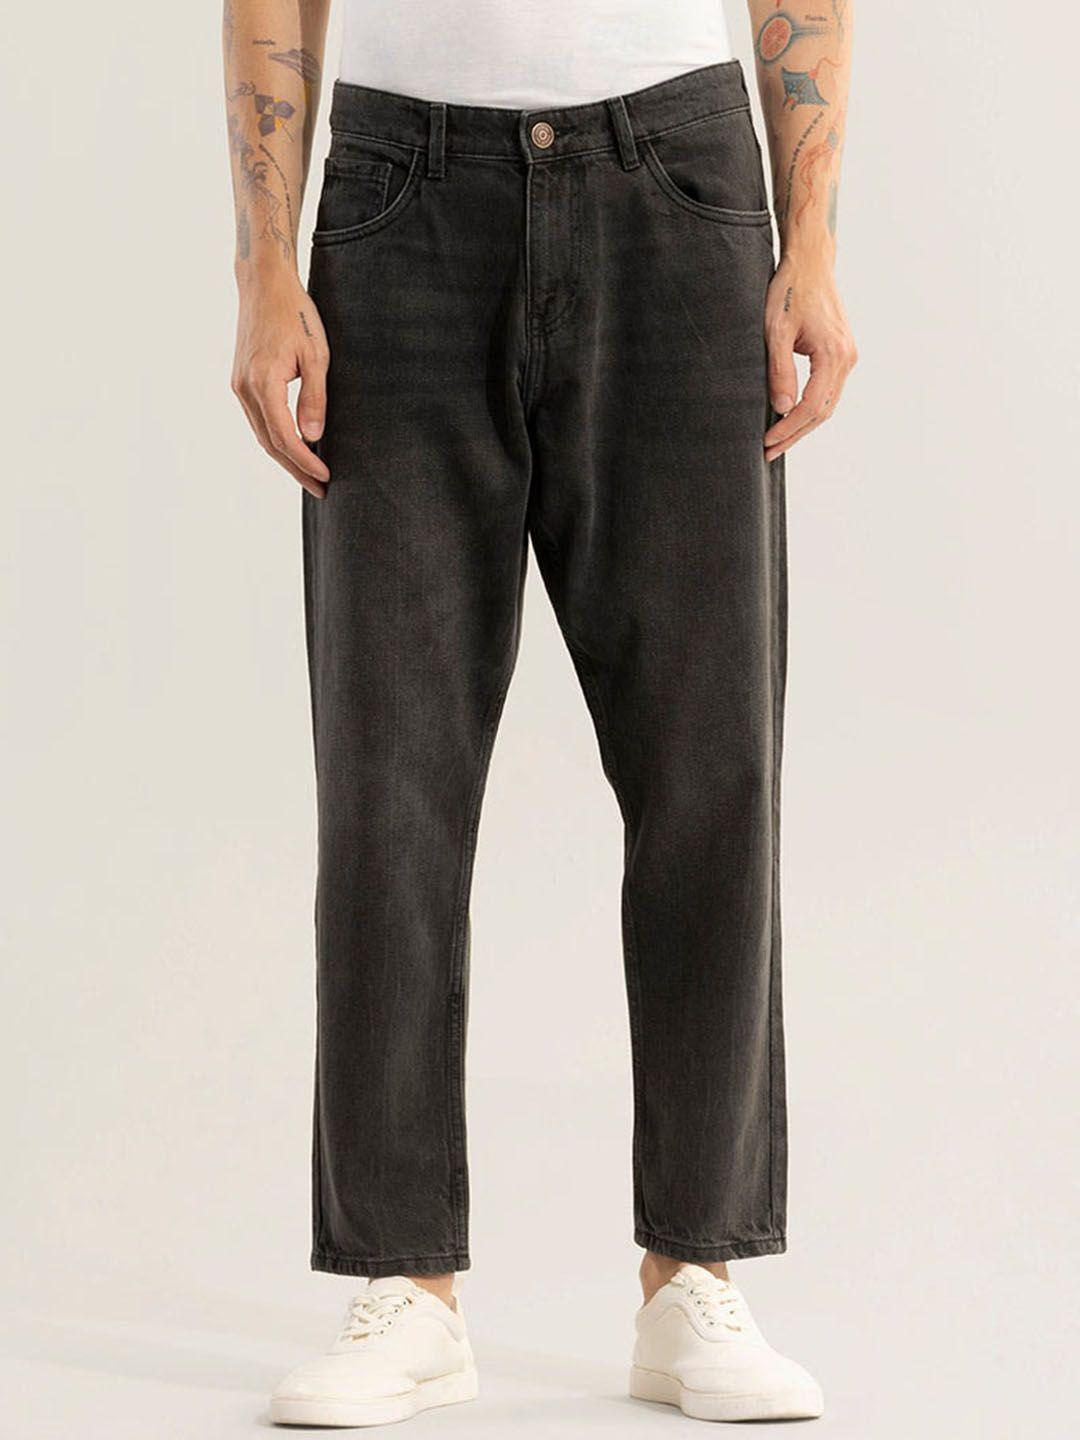 snitch-men-relaxed-fit-stretchable-jeans